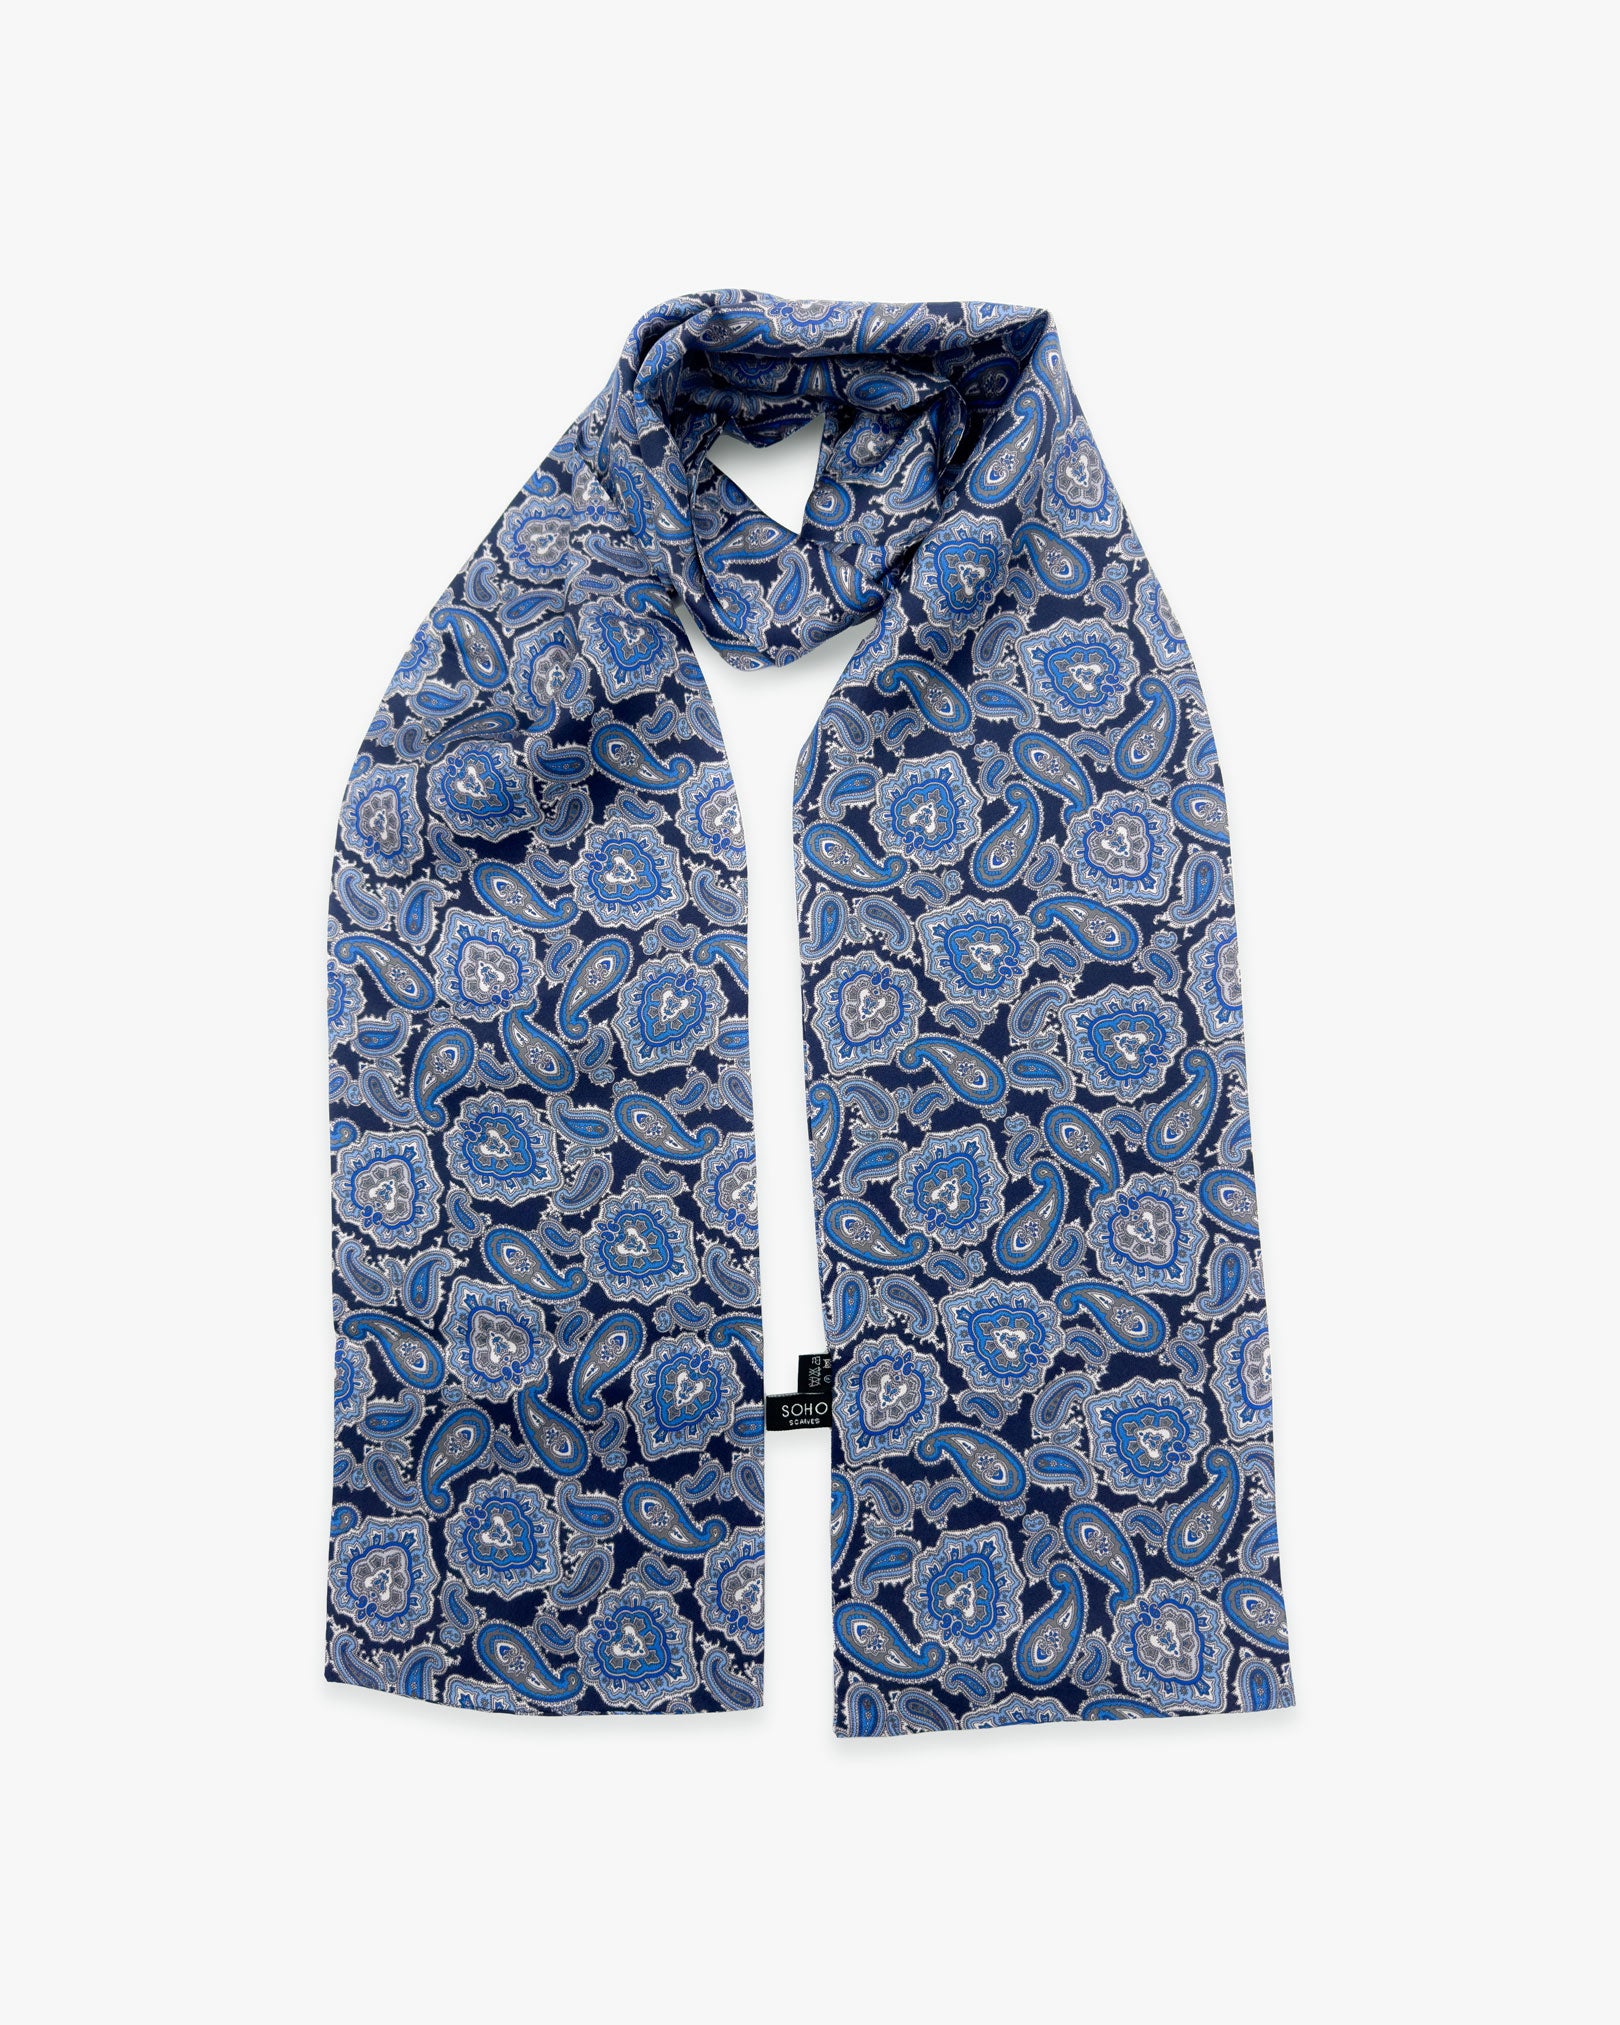 The Dezon pure silk scarf looped in middle with both ends parallel showing the blue paisley patterns.